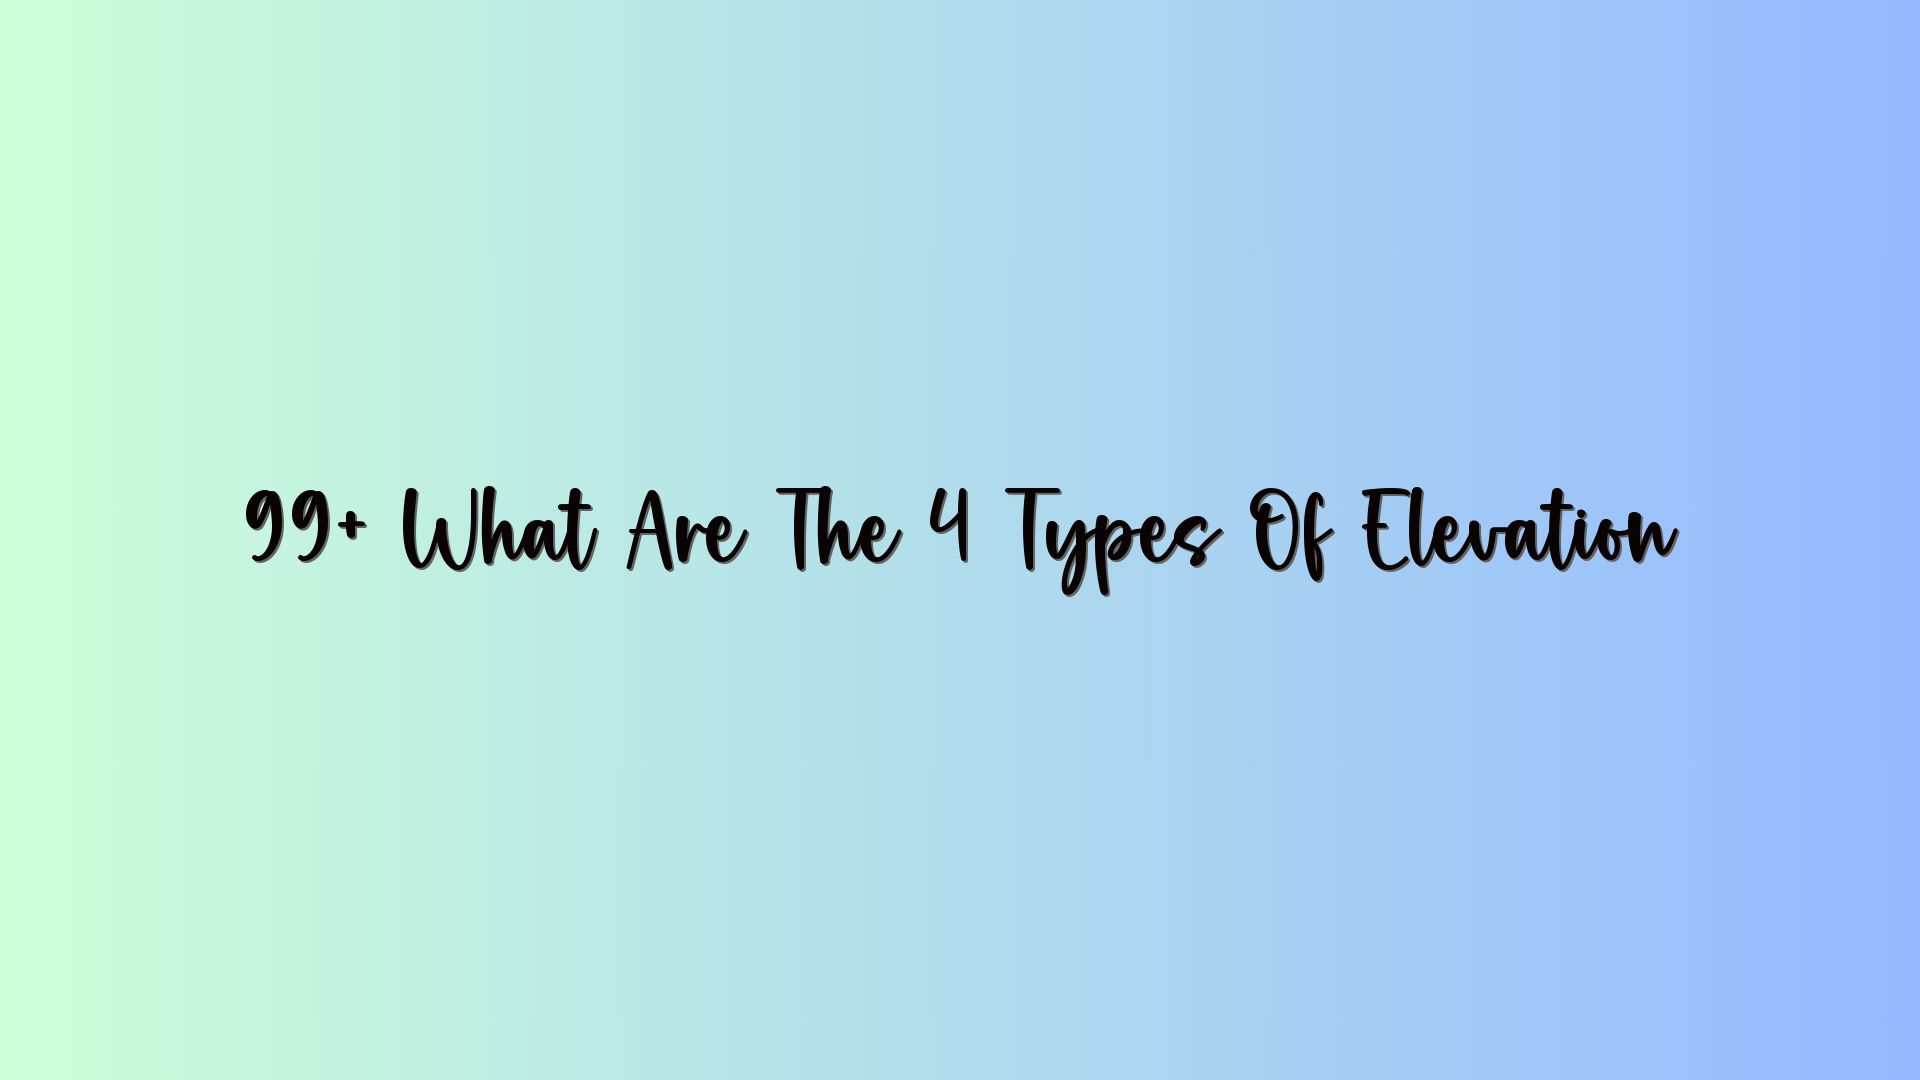 99+ What Are The 4 Types Of Elevation